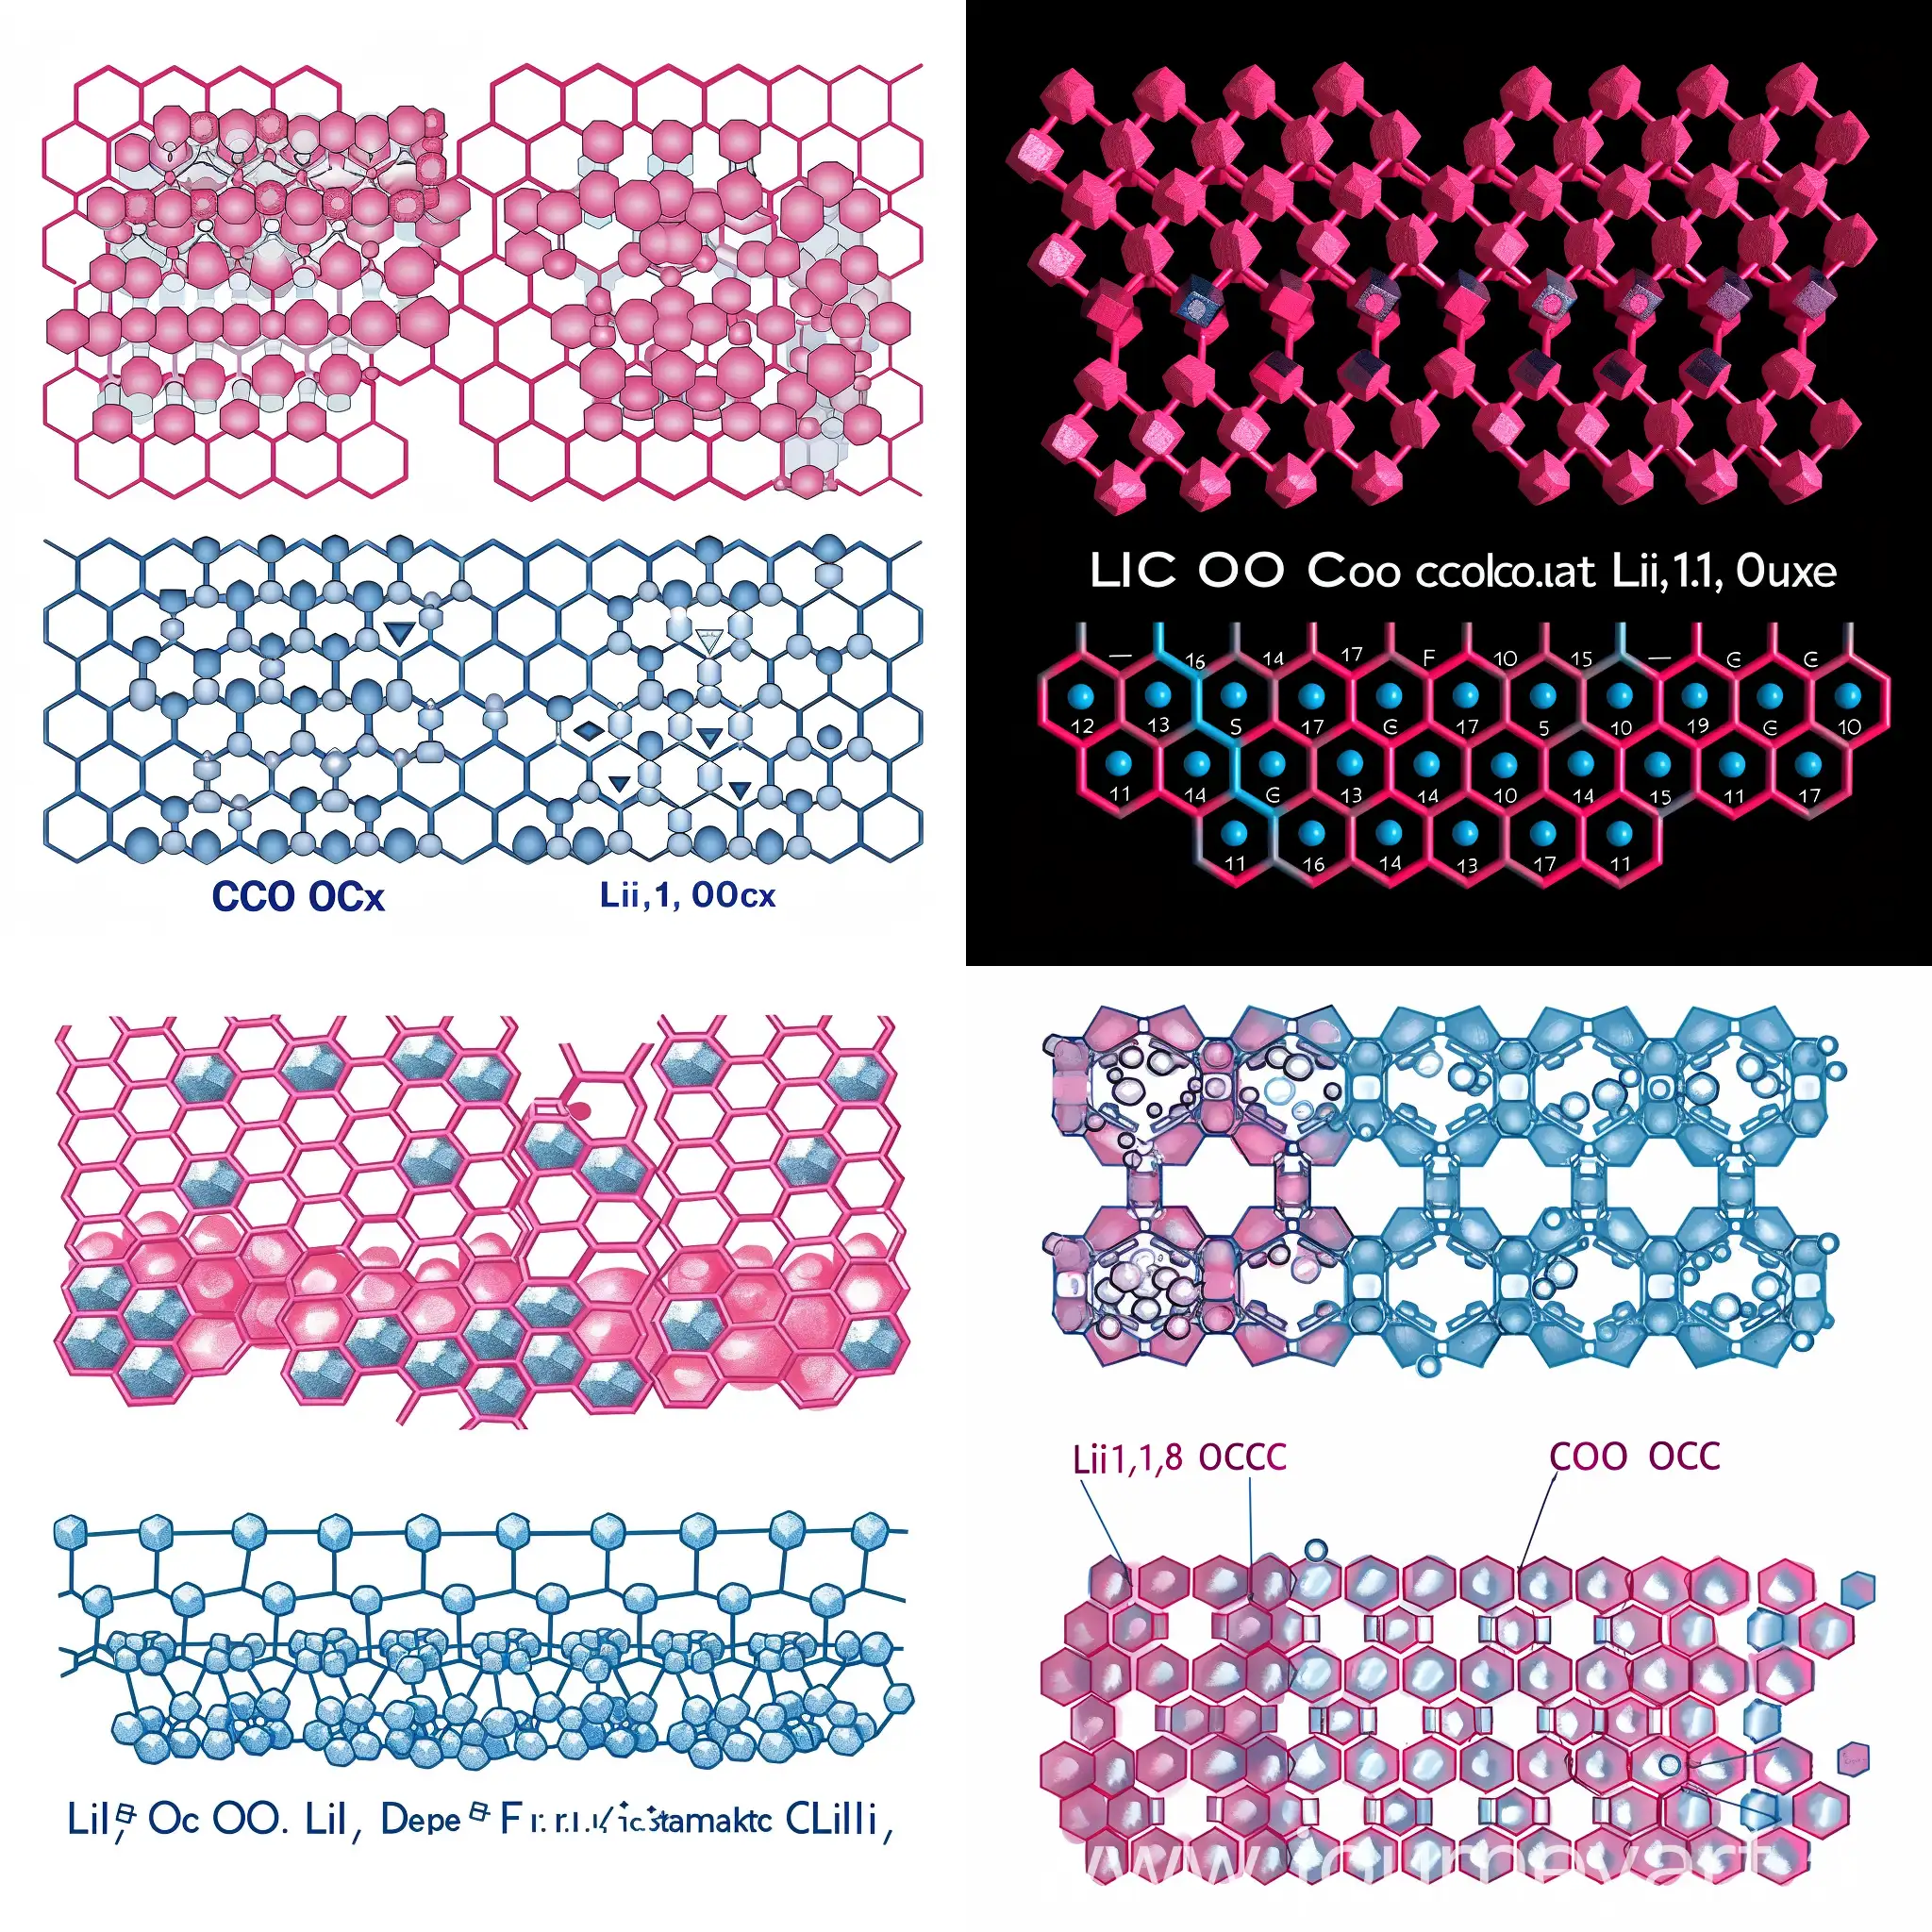 Hexagonal-Network-of-Lithium-Cobalt-Oxide-with-Doped-Ions-Pink-Co-Ions-and-Blue-Li-Ions-in-a-Regular-Lattice